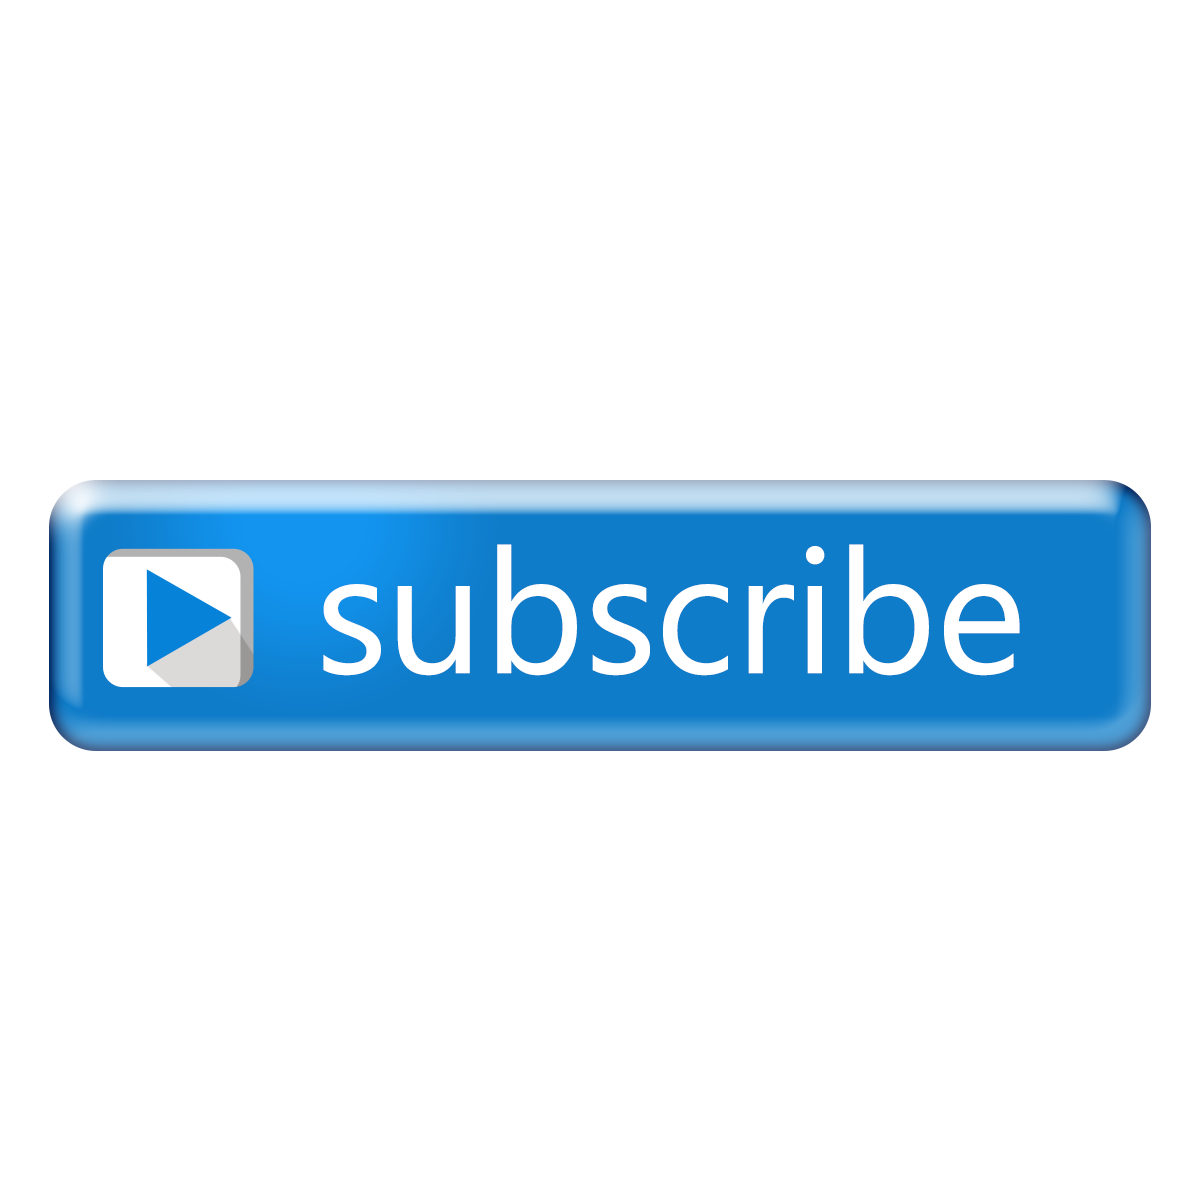 Free download high quality blue subscribe button png transparent background Its a good quality 3D subscribe. First youtube video ideas, Youtube logo, Button image